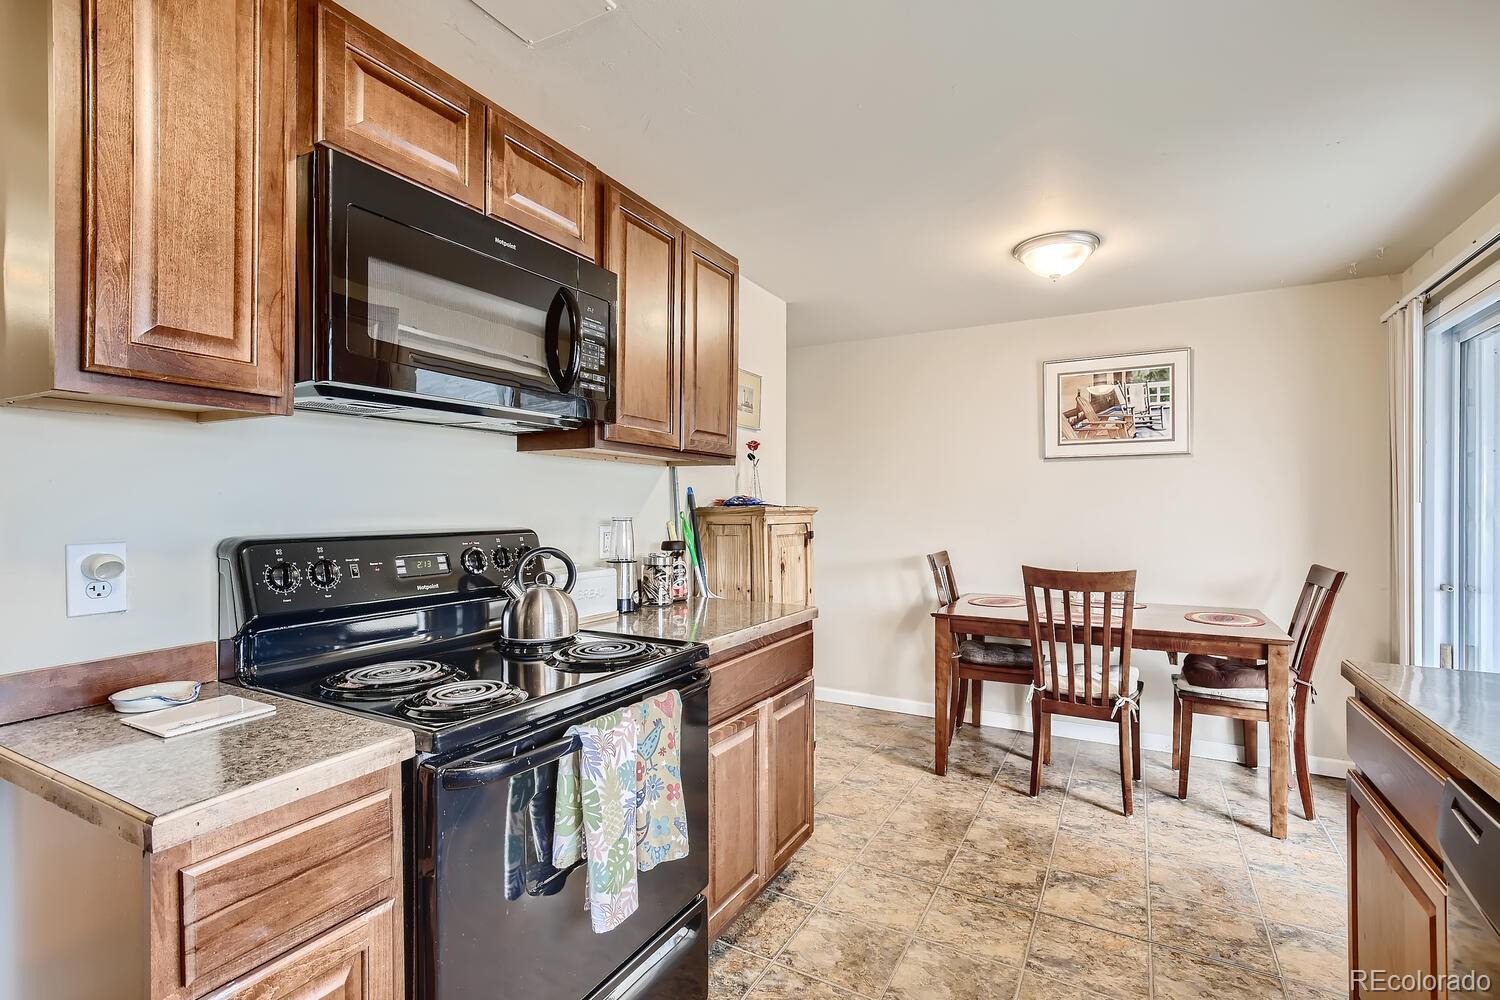 2503 74th, Westminster, CO